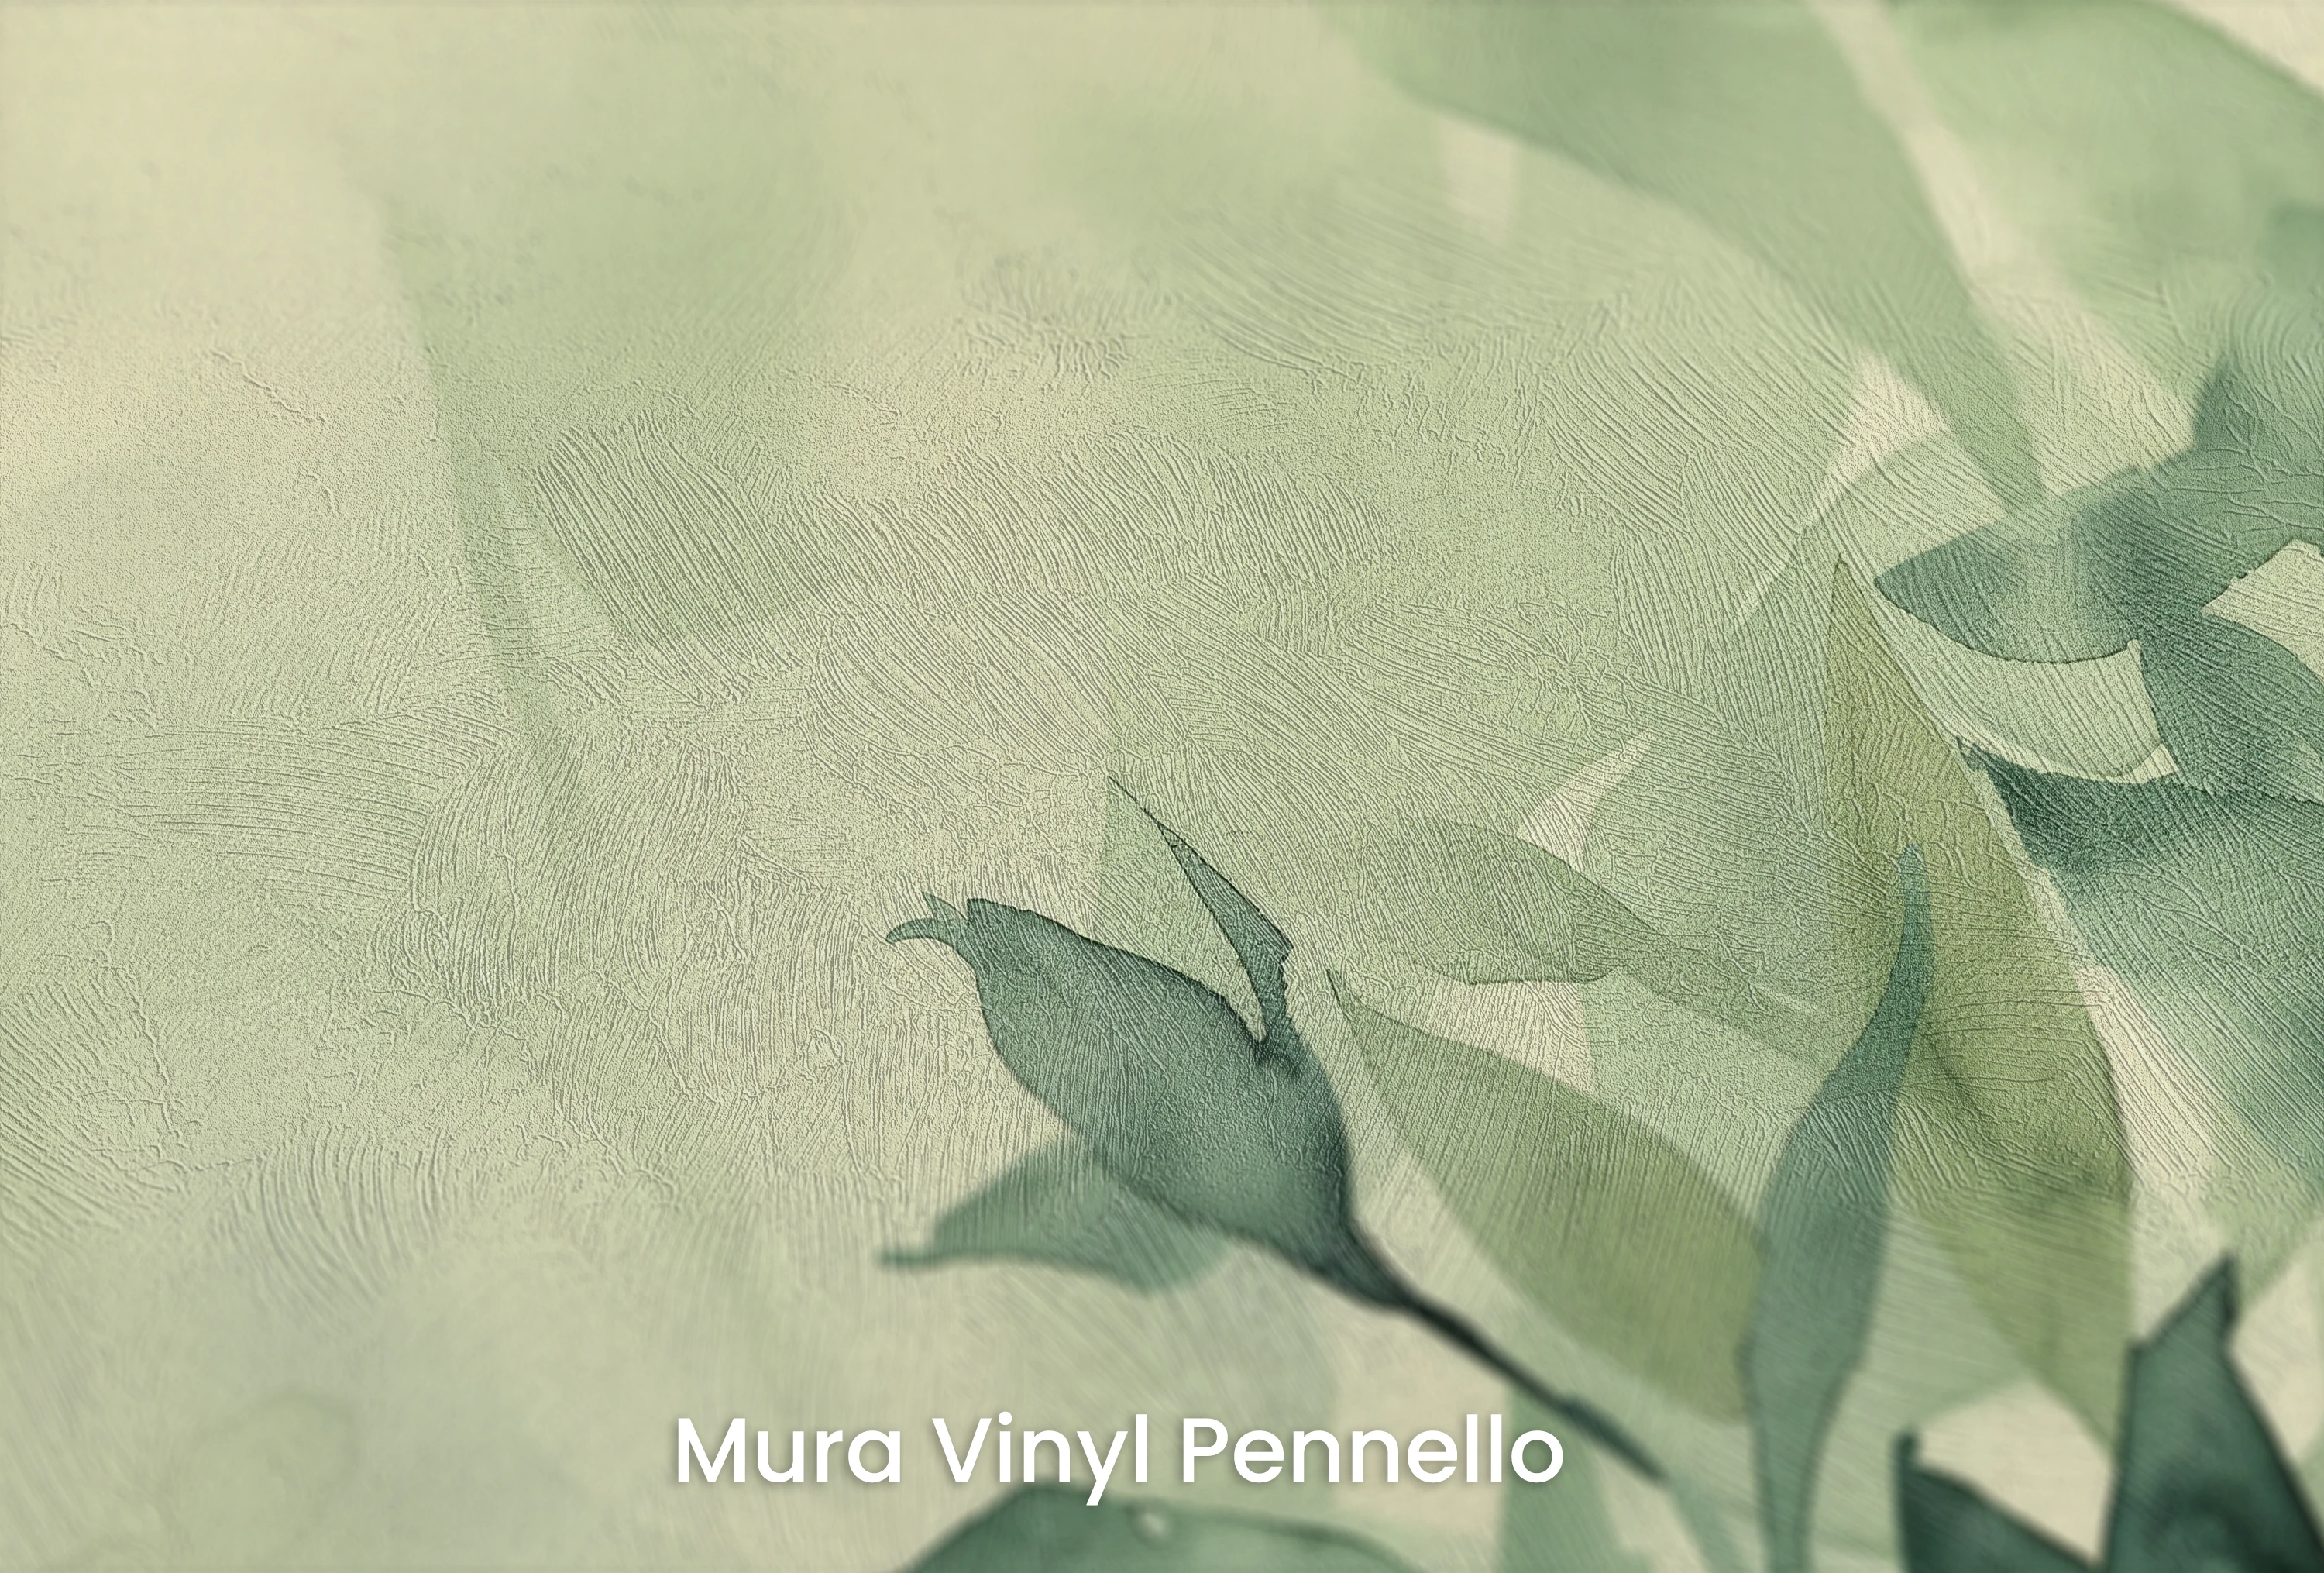 A photo wallpaper pattern printed on the "Mura Vinyl Pennello" substrate